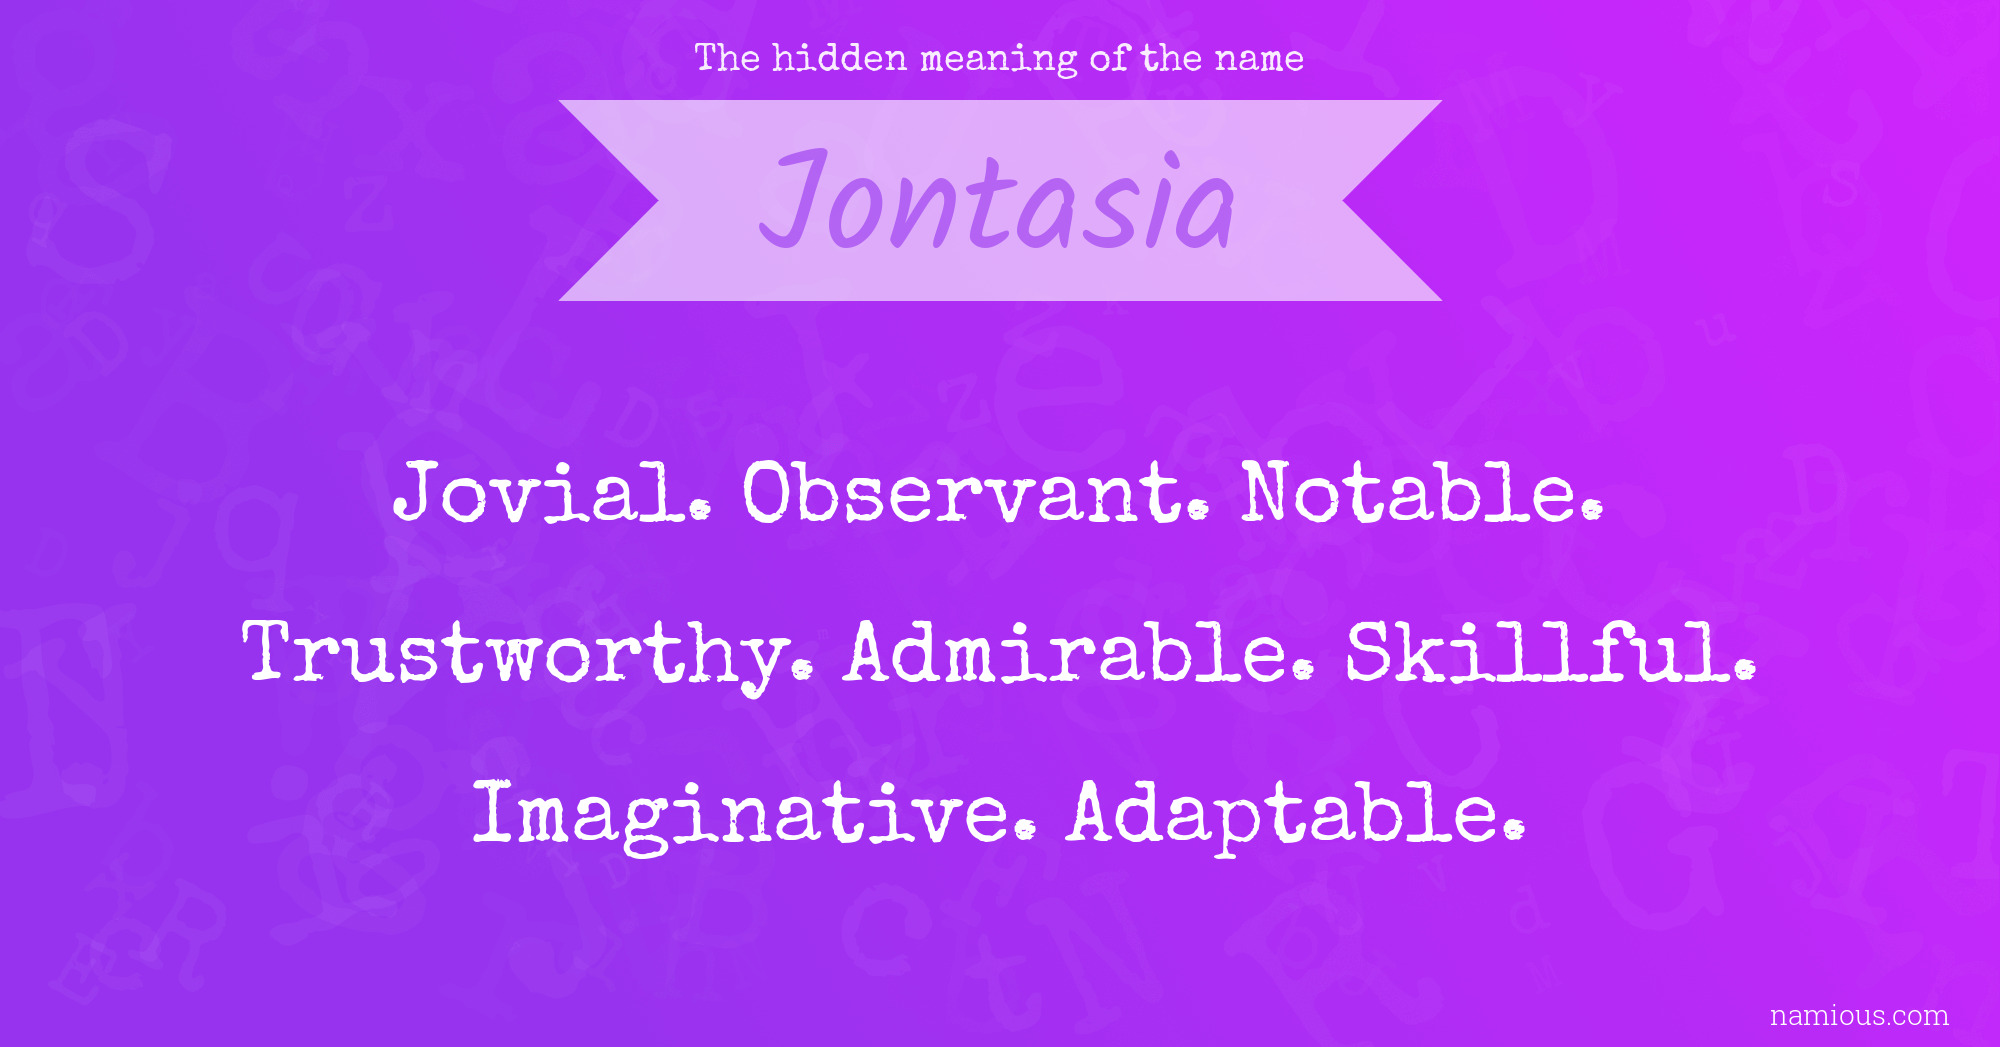 The hidden meaning of the name Jontasia